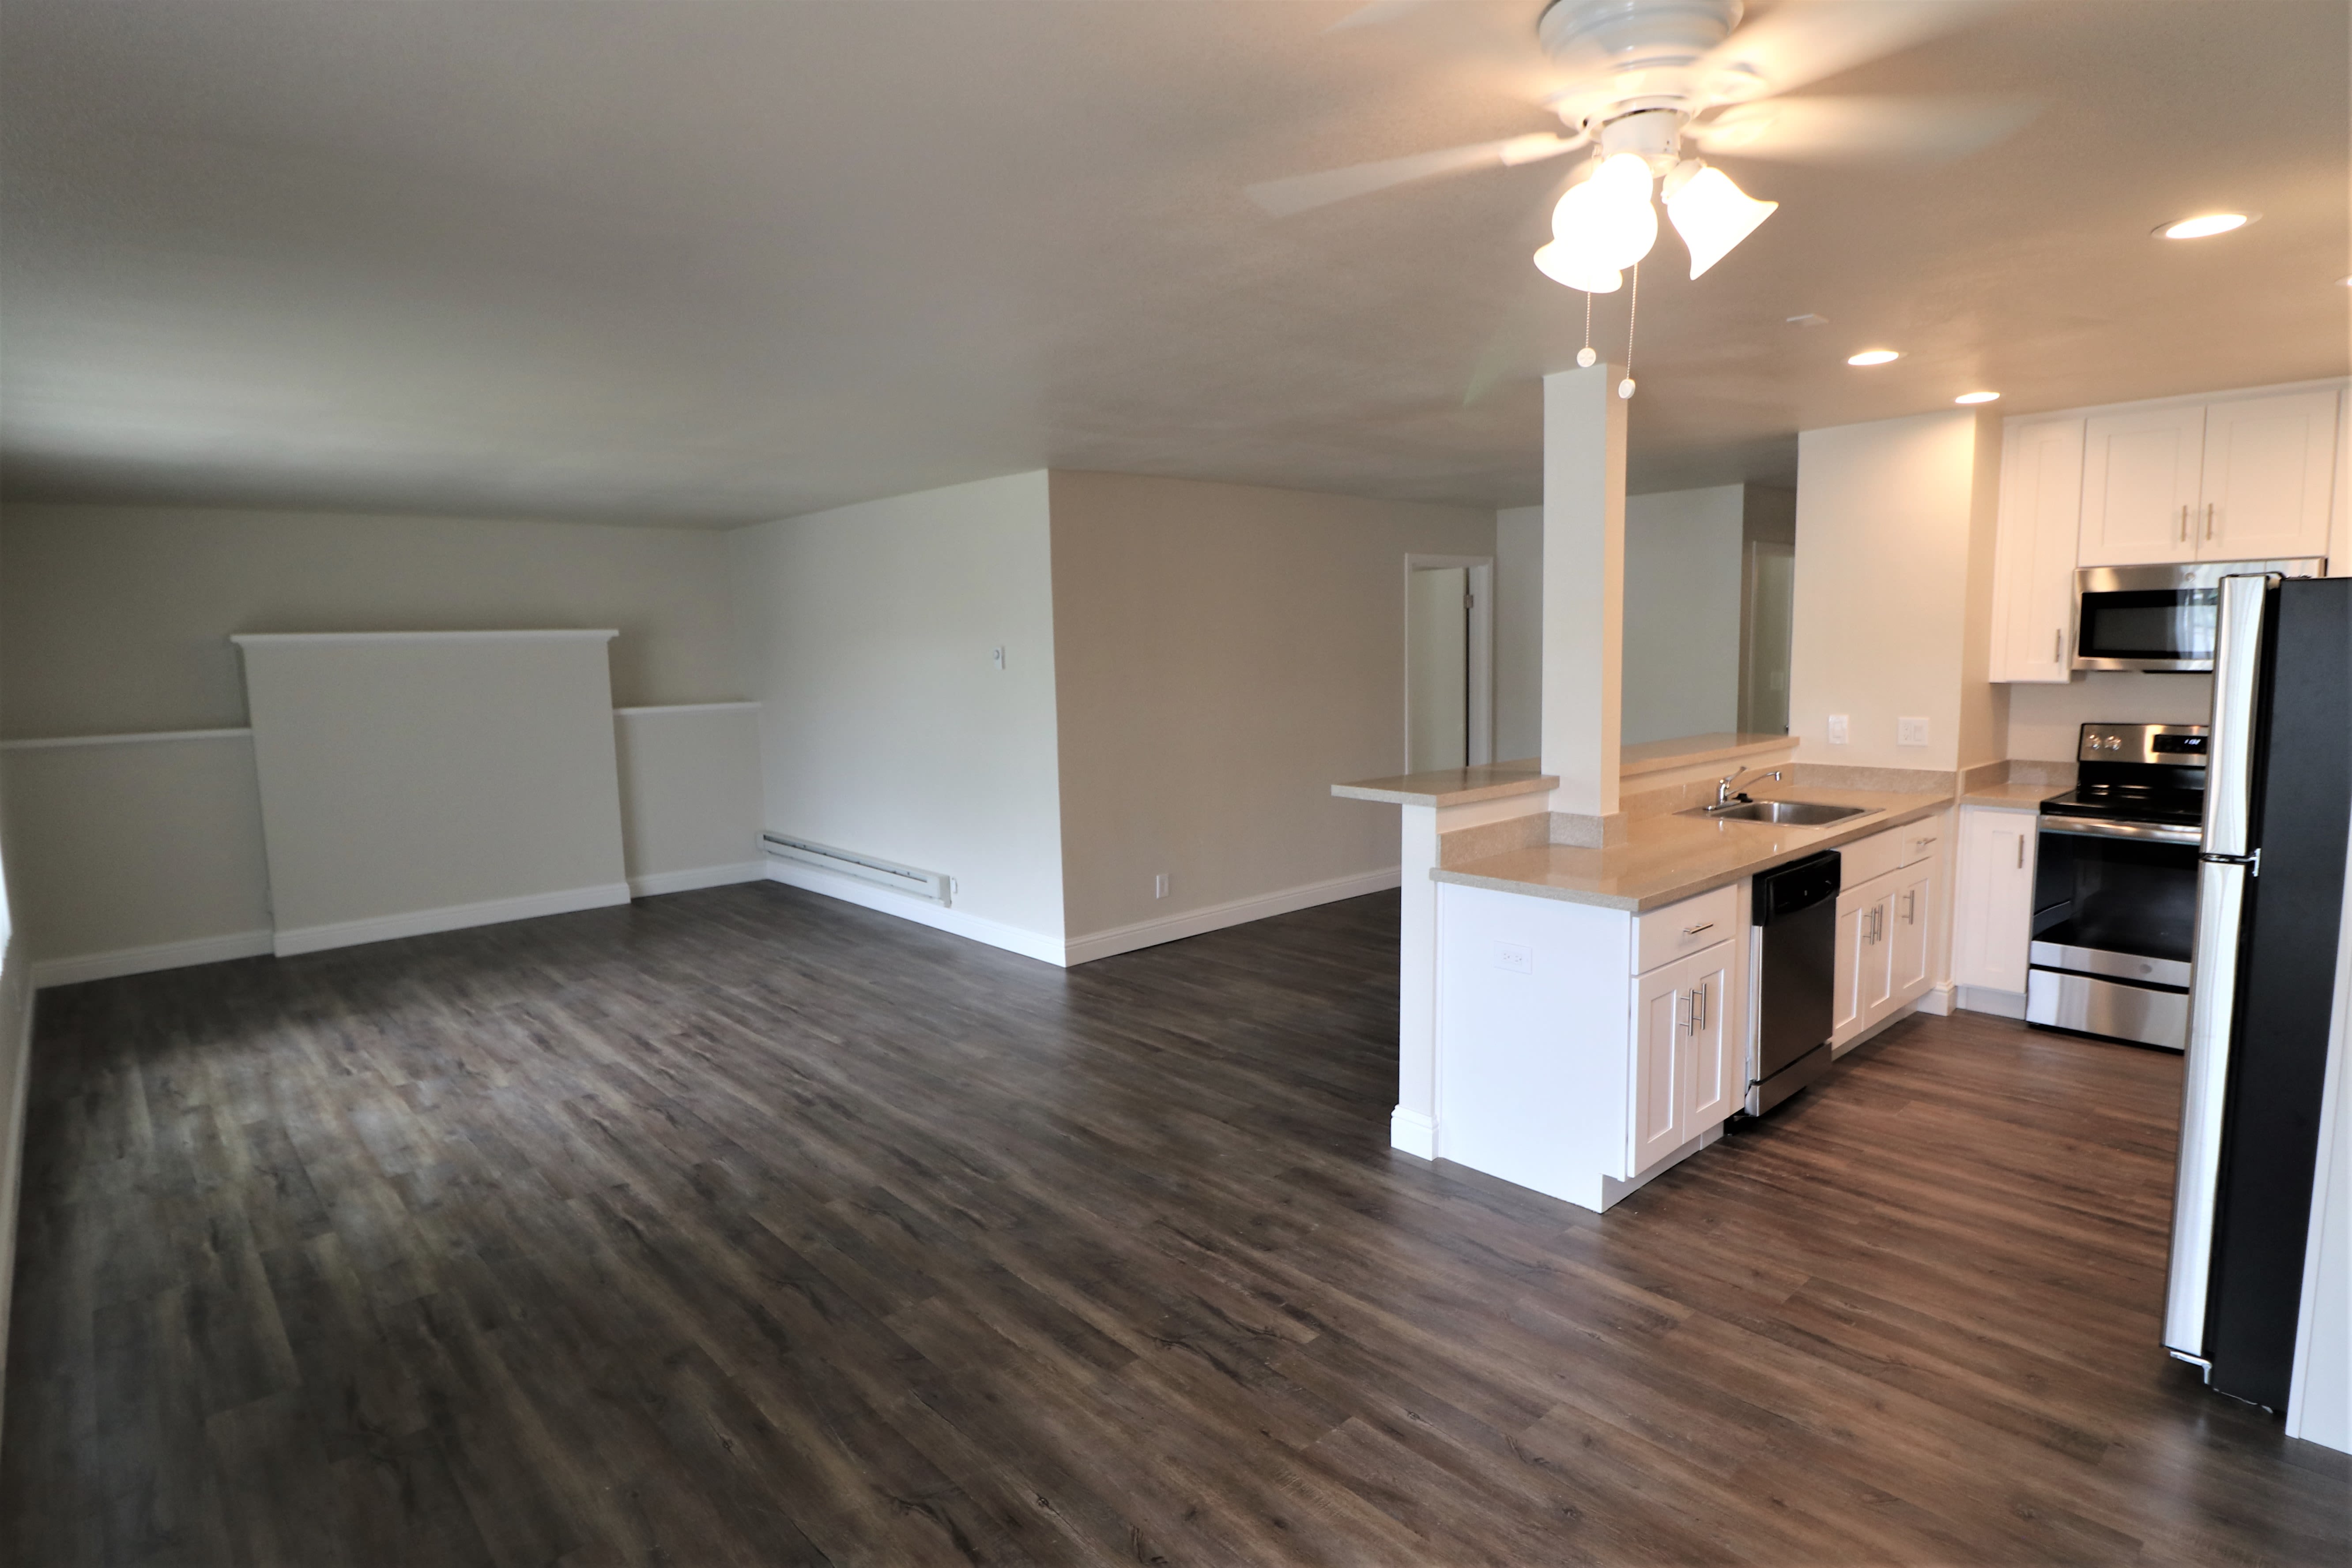 Kitchen, dining room and living room with wood-style flooring at Marina Haven Apartments in San Leandro, California